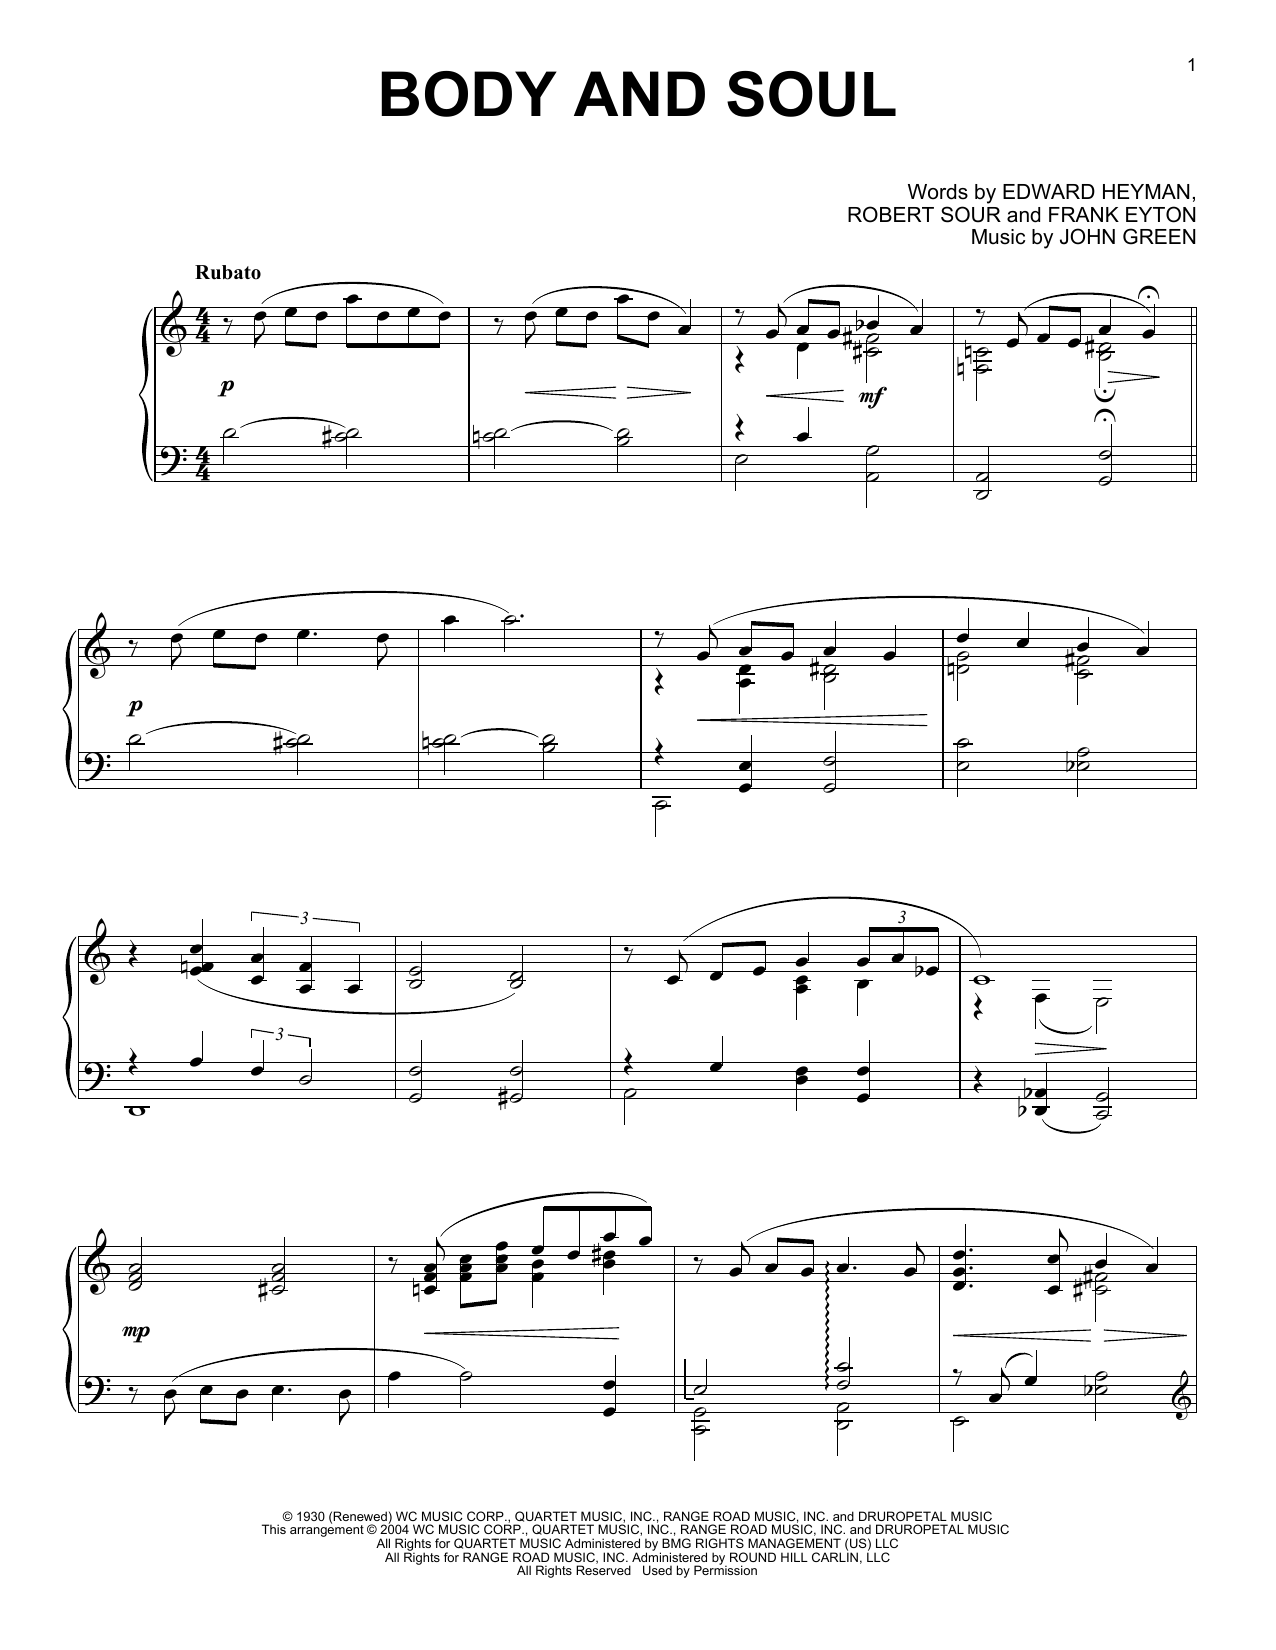 Edward Heyman Body And Soul sheet music notes and chords. Download Printable PDF.